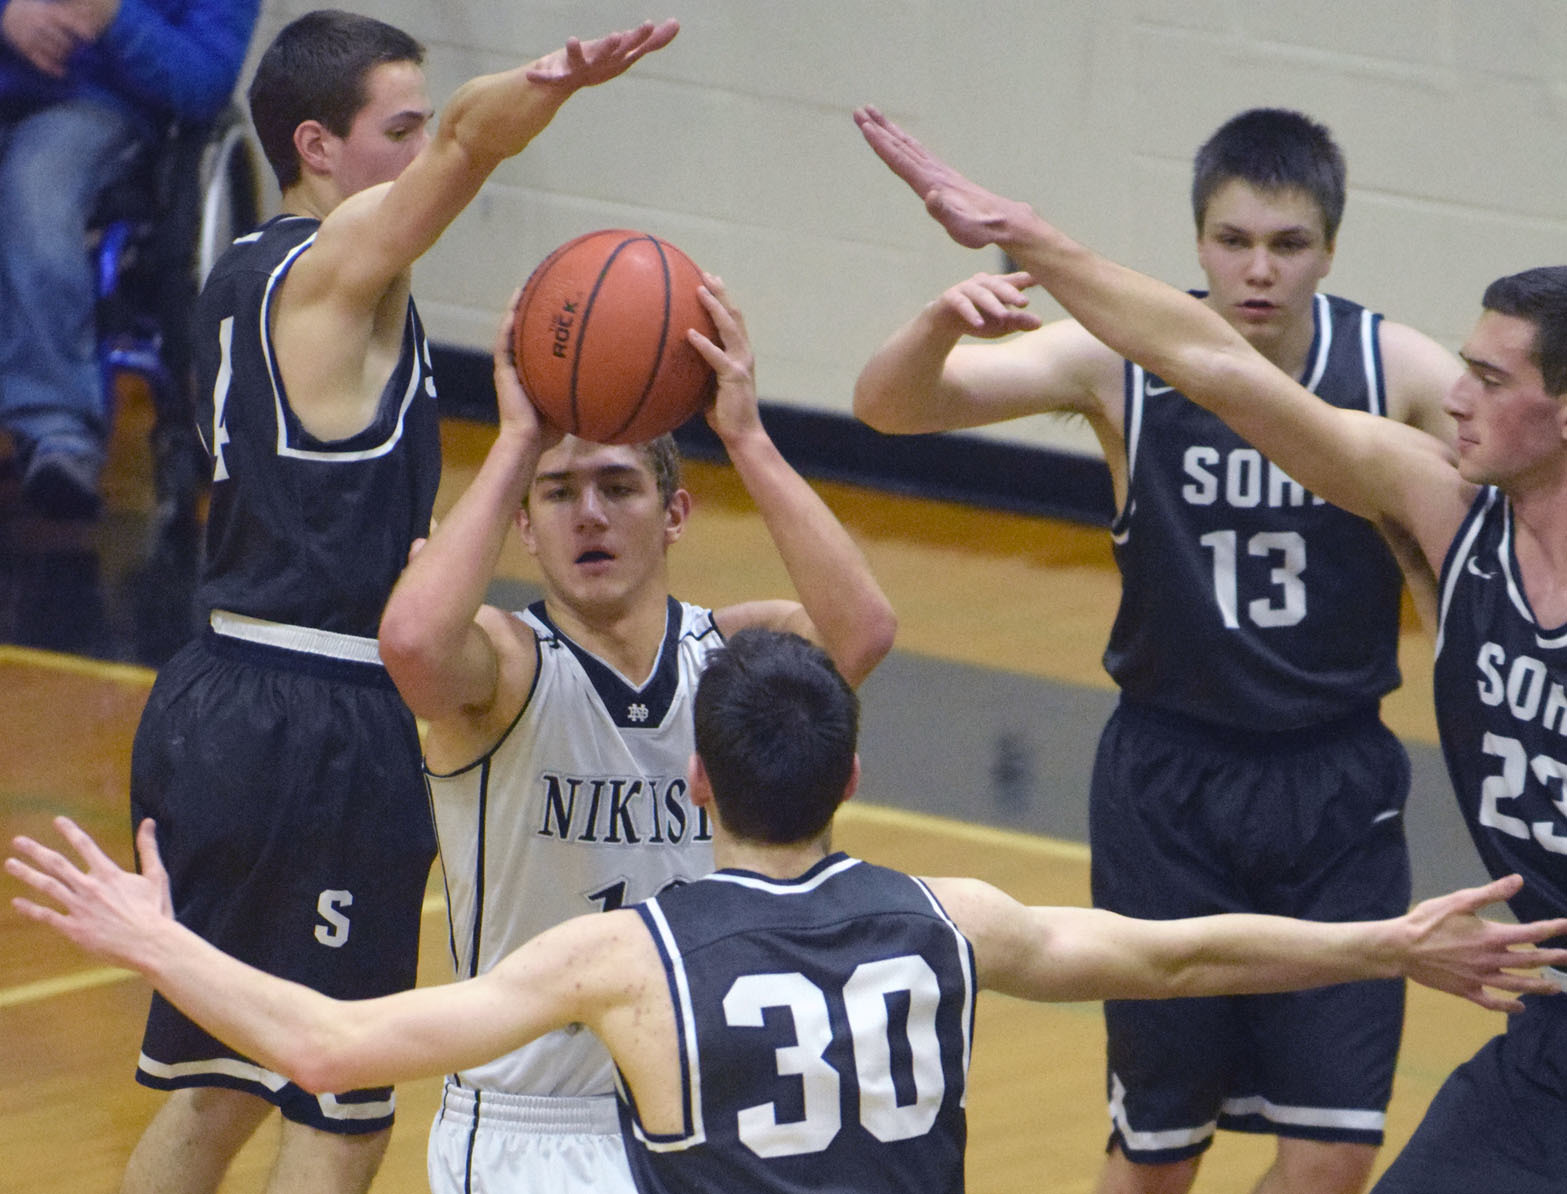 Nikiski’s Ian Johnson extracts himself from a maze of defenders Tuesday, Jan. 31, 2017, at Nikiski High School. From left are Caleb Spence, Sam McElroy, Eli Sheridan and Derek Evans. (Photo by Jeff Helminiak/Peninsula Clarion)